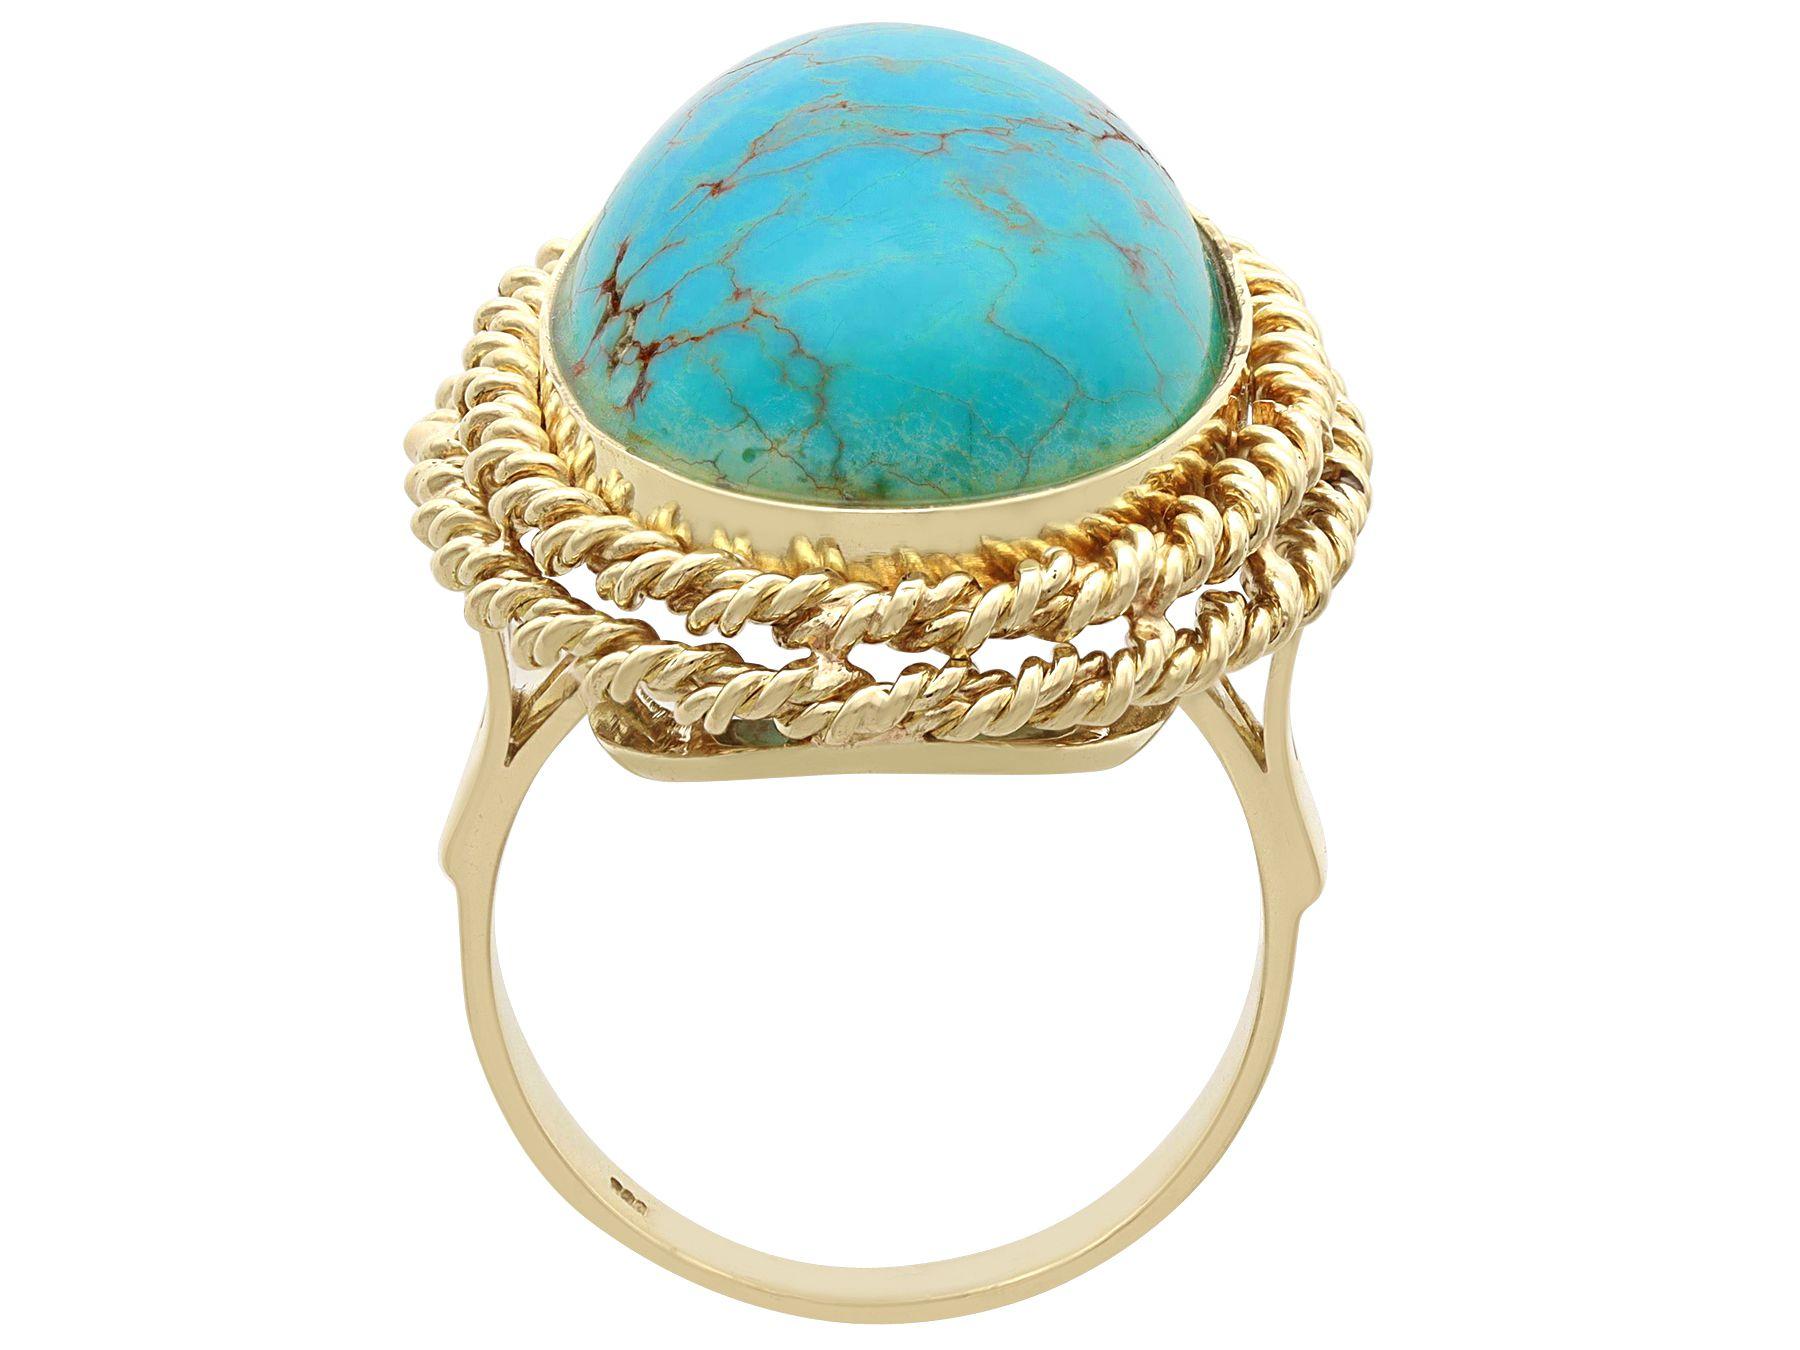 Vintage 32.50 Carat Turquoise and Yellow Gold Cocktail Ring In Excellent Condition For Sale In Jesmond, Newcastle Upon Tyne